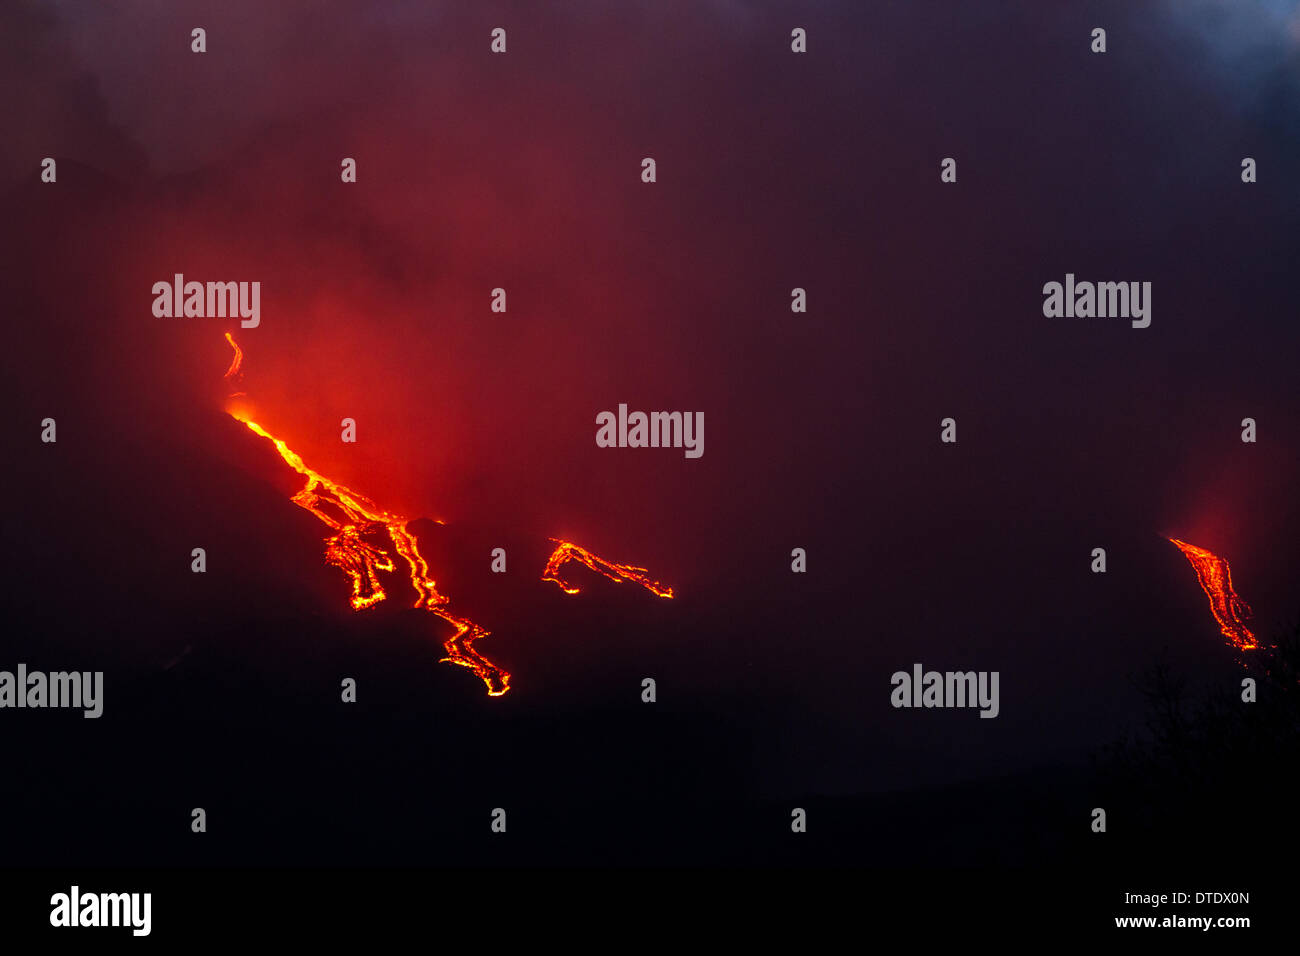 More explosions in the night and lava flow Stock Photo